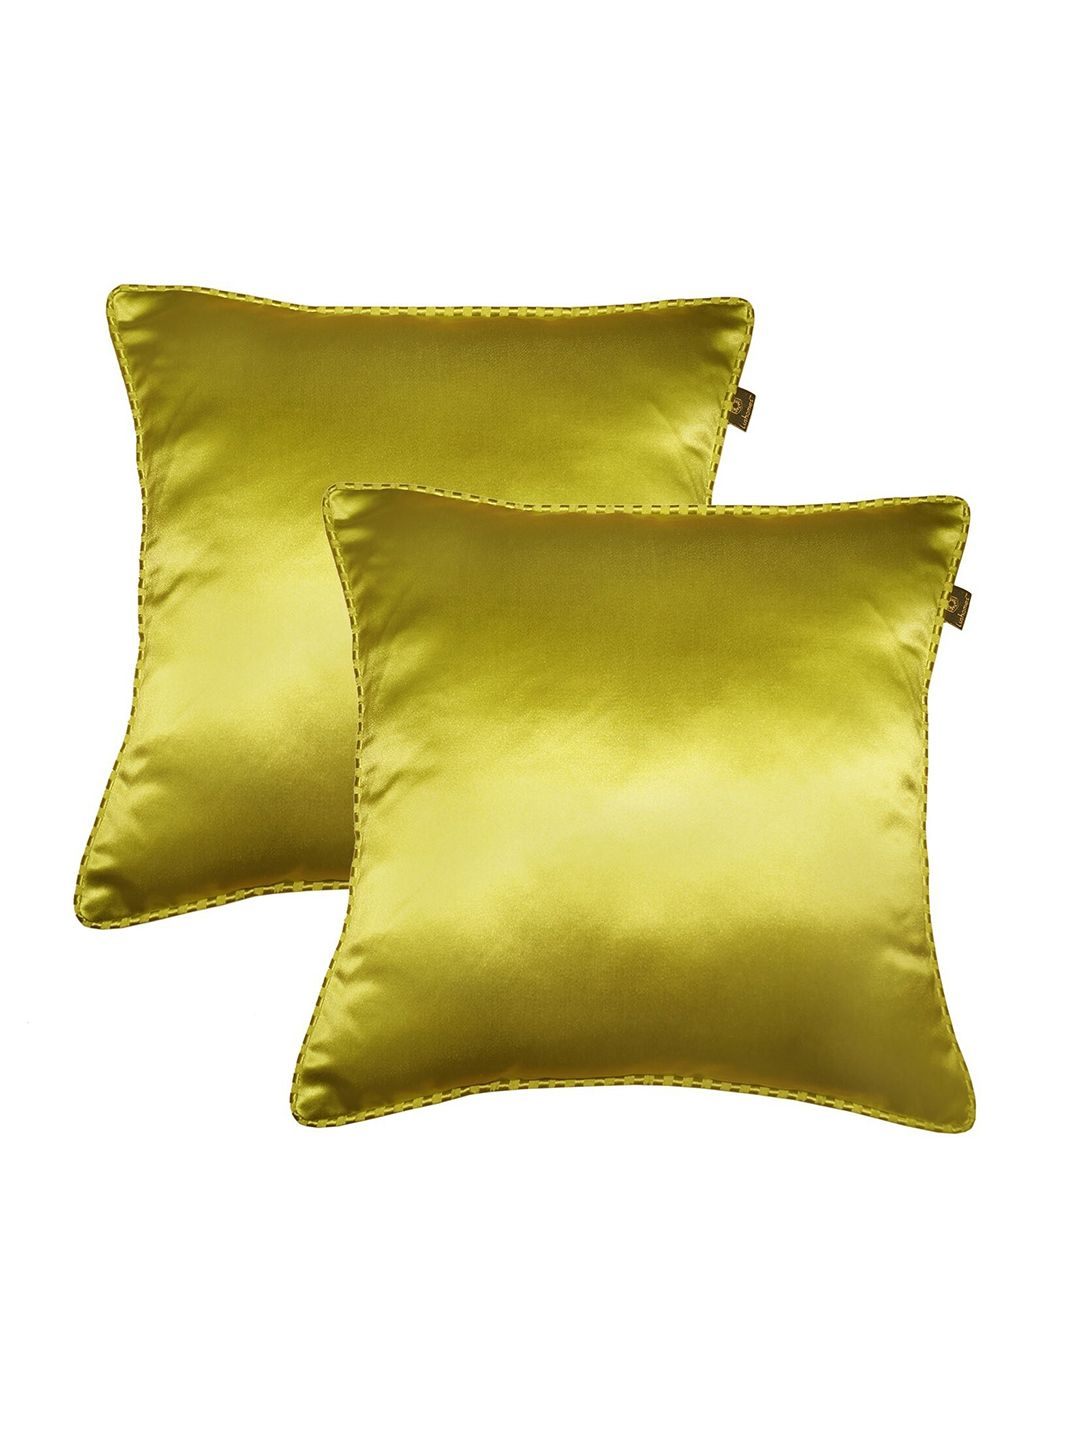 Lushomes Green Set of 2 Square Cushion Covers Price in India